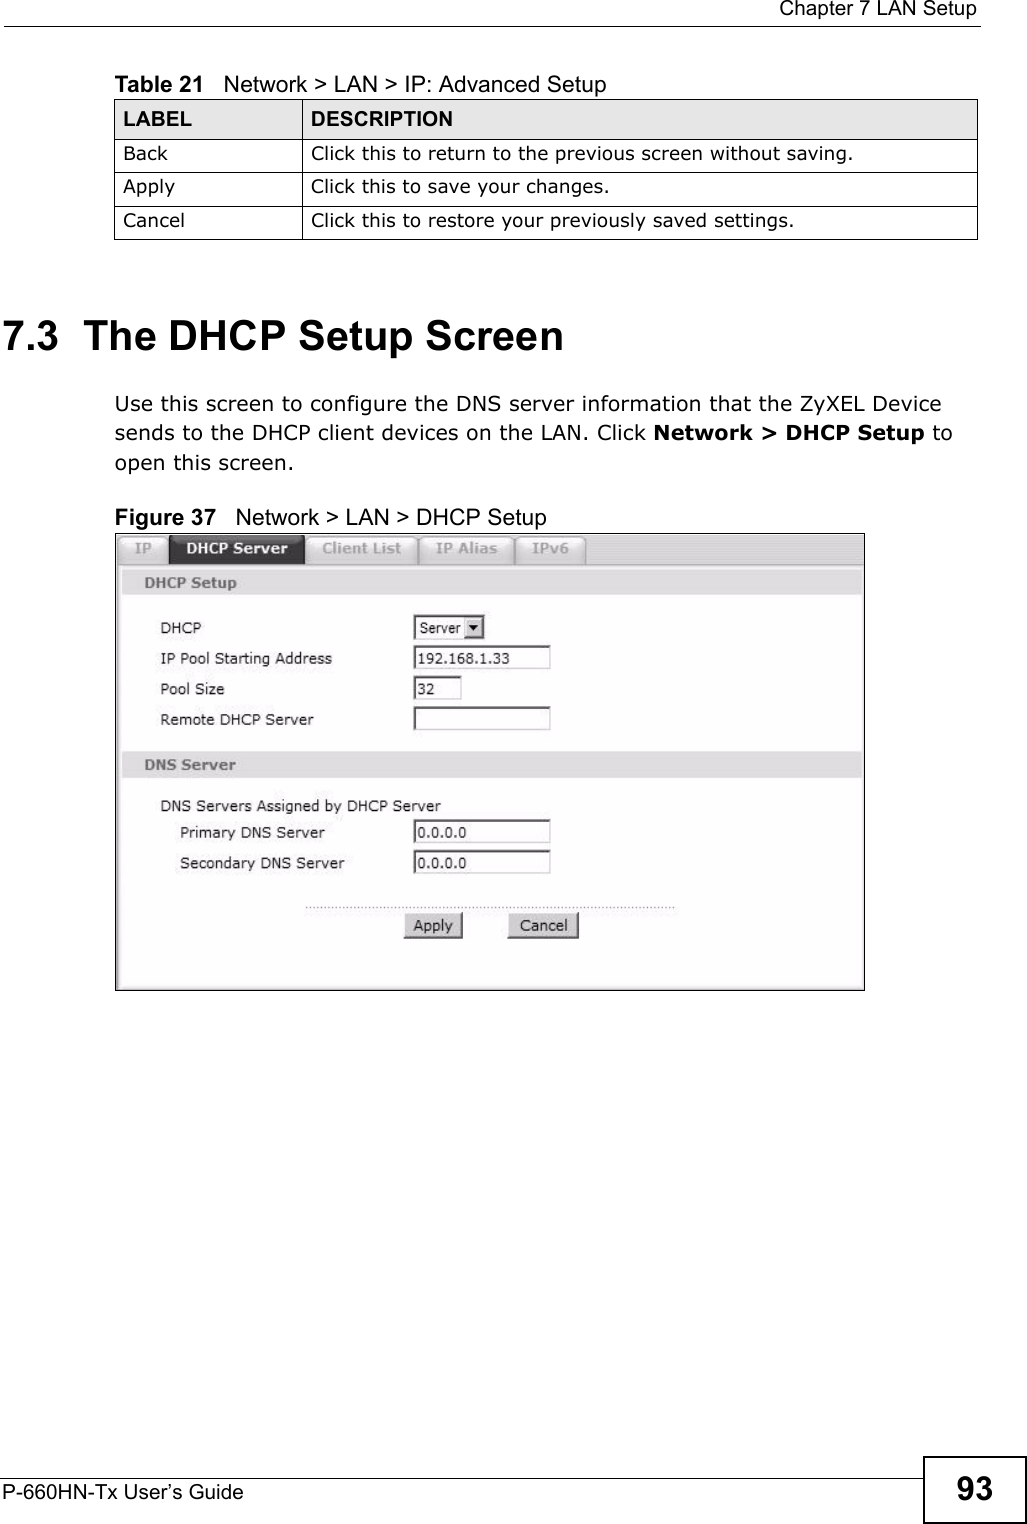  Chapter 7 LAN SetupP-660HN-Tx User’s Guide 937.3  The DHCP Setup ScreenUse this screen to configure the DNS server information that the ZyXEL Device sends to the DHCP client devices on the LAN. Click Network &gt; DHCP Setup to open this screen.Figure 37   Network &gt; LAN &gt; DHCP SetupBack Click this to return to the previous screen without saving.Apply Click this to save your changes.Cancel Click this to restore your previously saved settings.Table 21   Network &gt; LAN &gt; IP: Advanced SetupLABEL DESCRIPTION